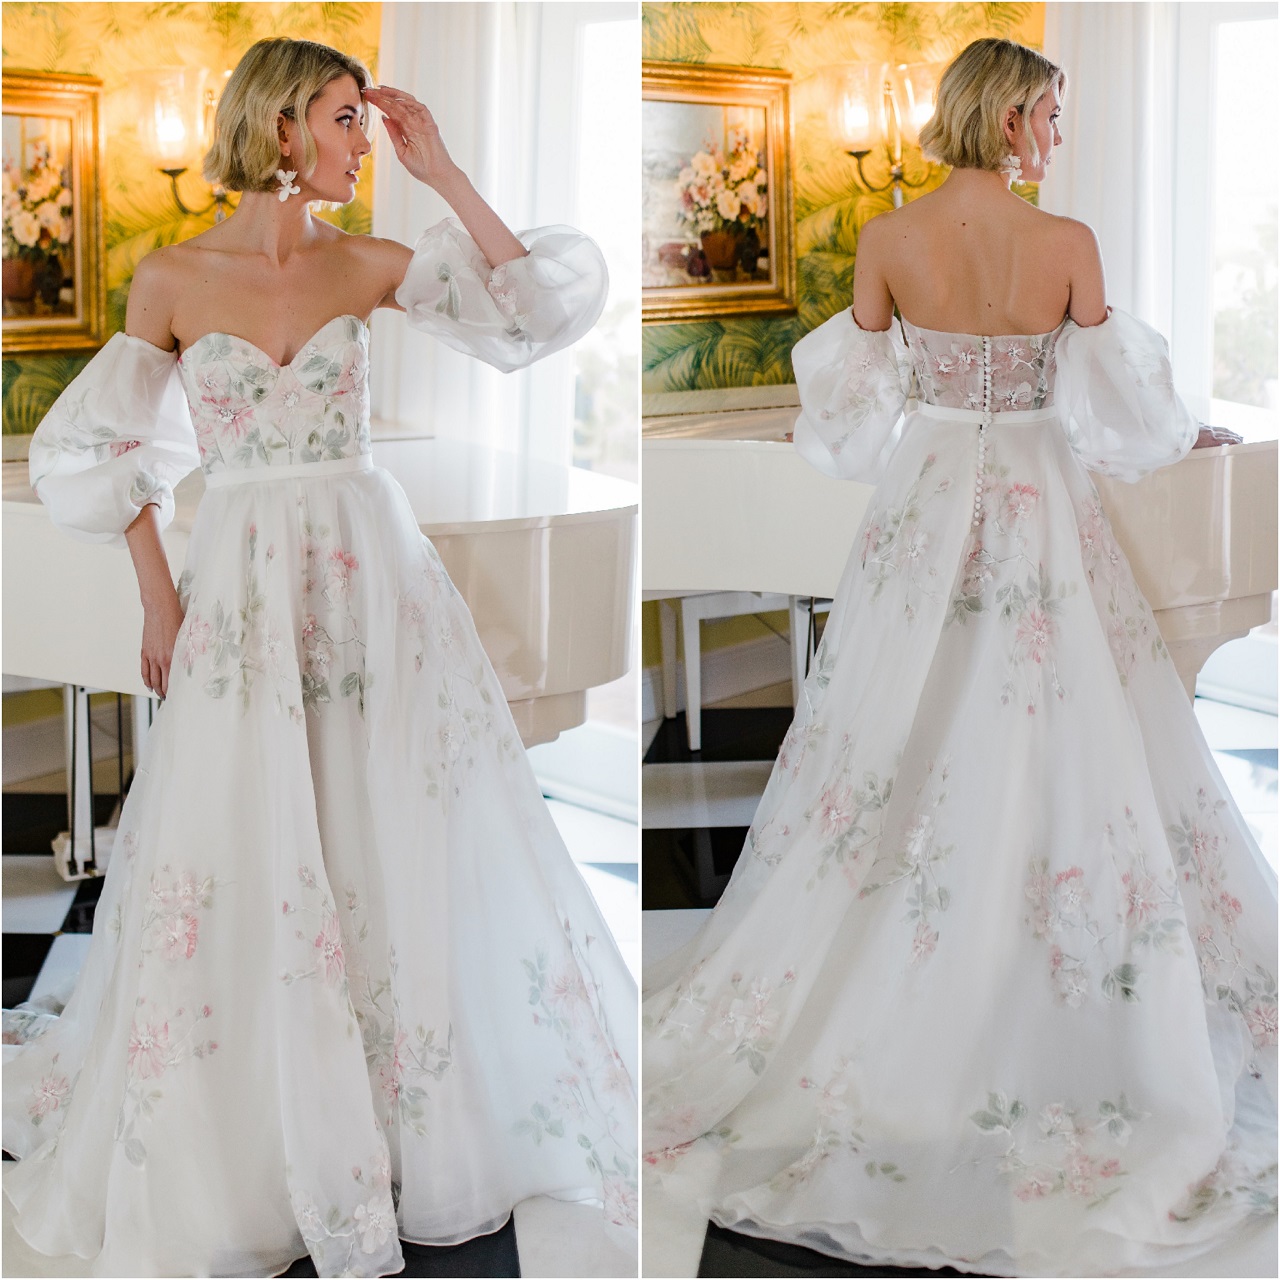 Unique Hand-Painted Flower Bridal Gown - Bridal and Formal